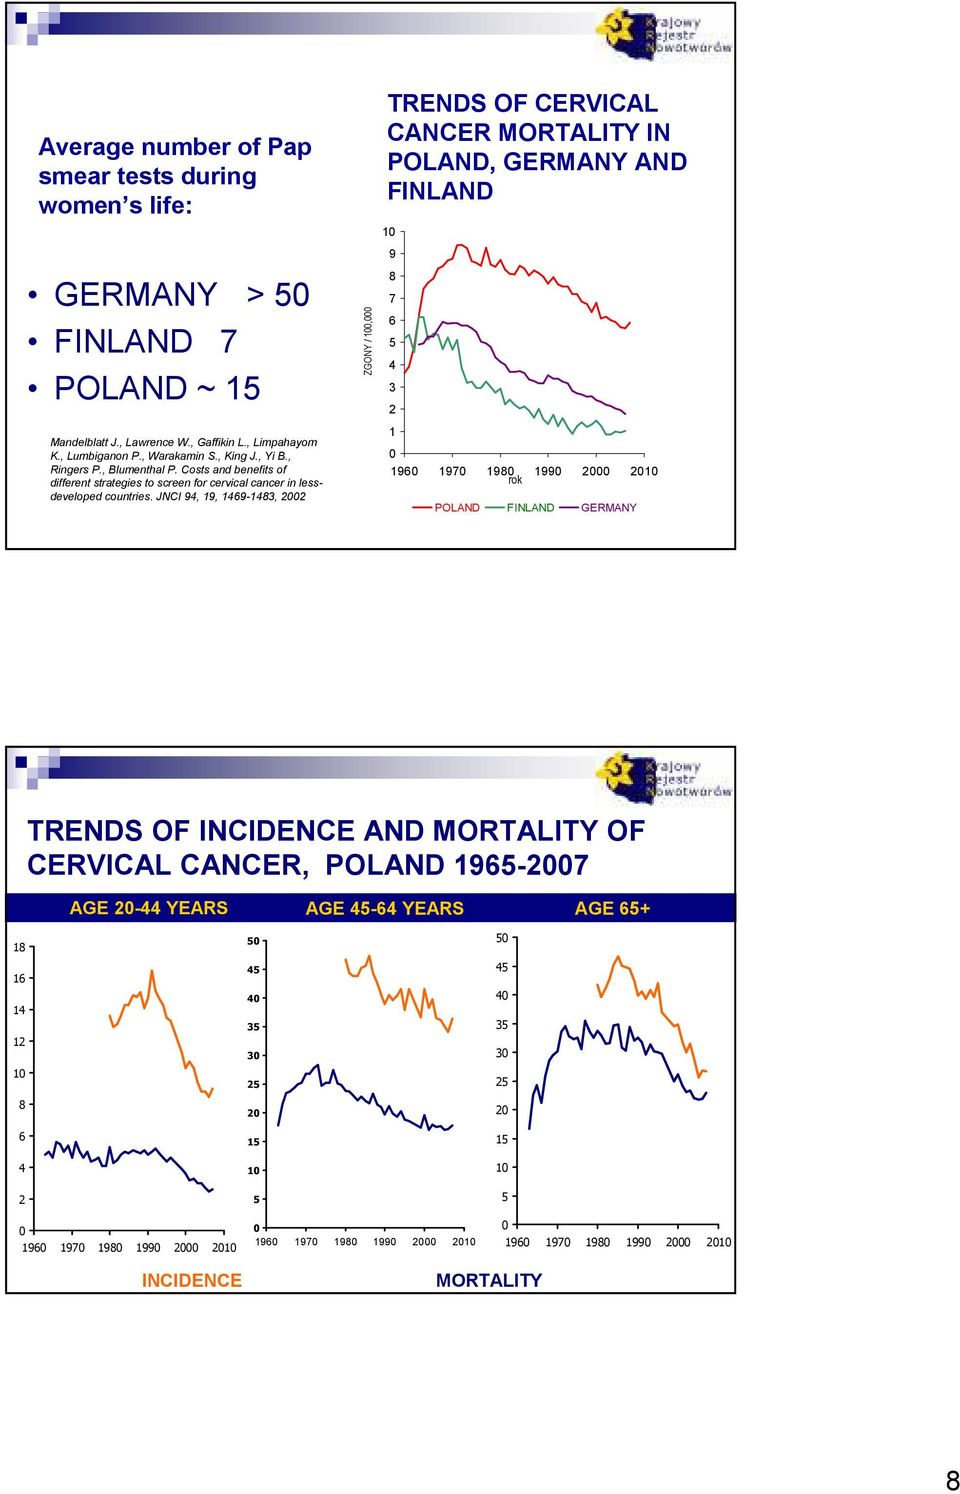 JNCI 94, 19, 1469-1483, 22 ZGONY / 1, TRENDS OF CERVICAL CANCER MORTALITY IN POLAND, GERMANY AND FINLAND 1 9 8 7 6 4 3 2 1 196 197 198 rok 199 2 21 POLAND FINLAND GERMANY TRENDS OF